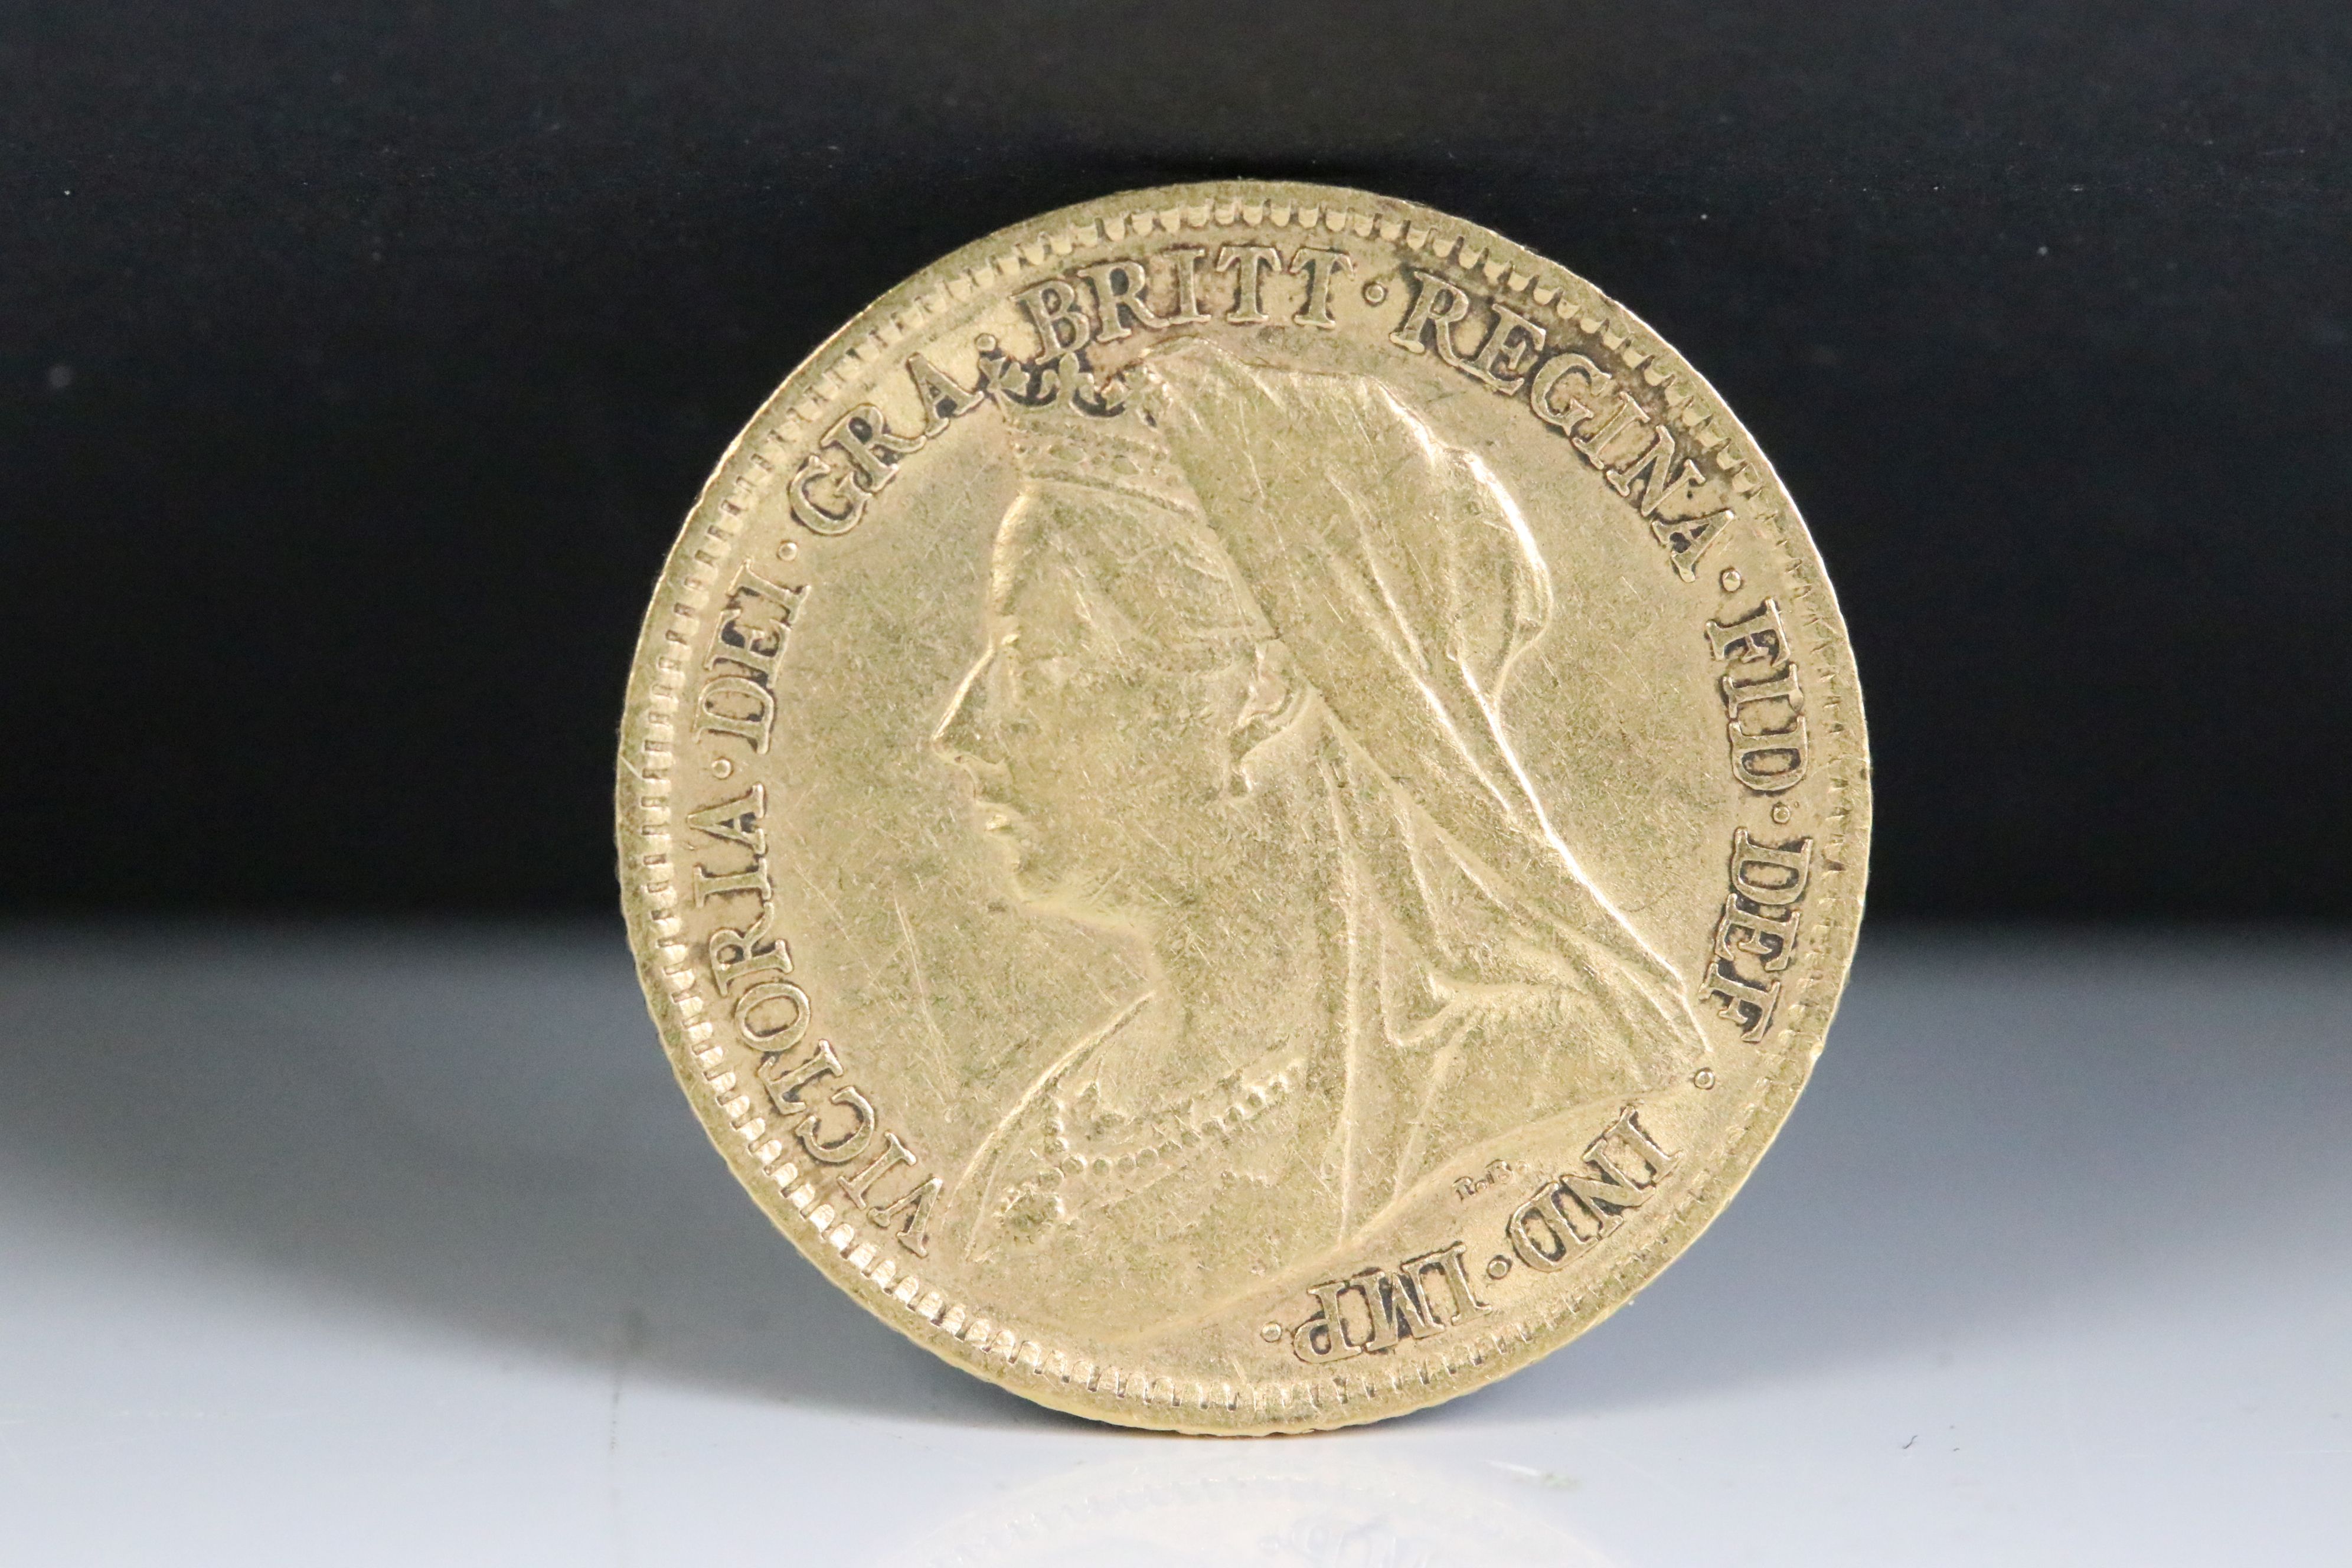 A British Queen Victoria gold half sovereign coin, dated 1900. - Image 2 of 3